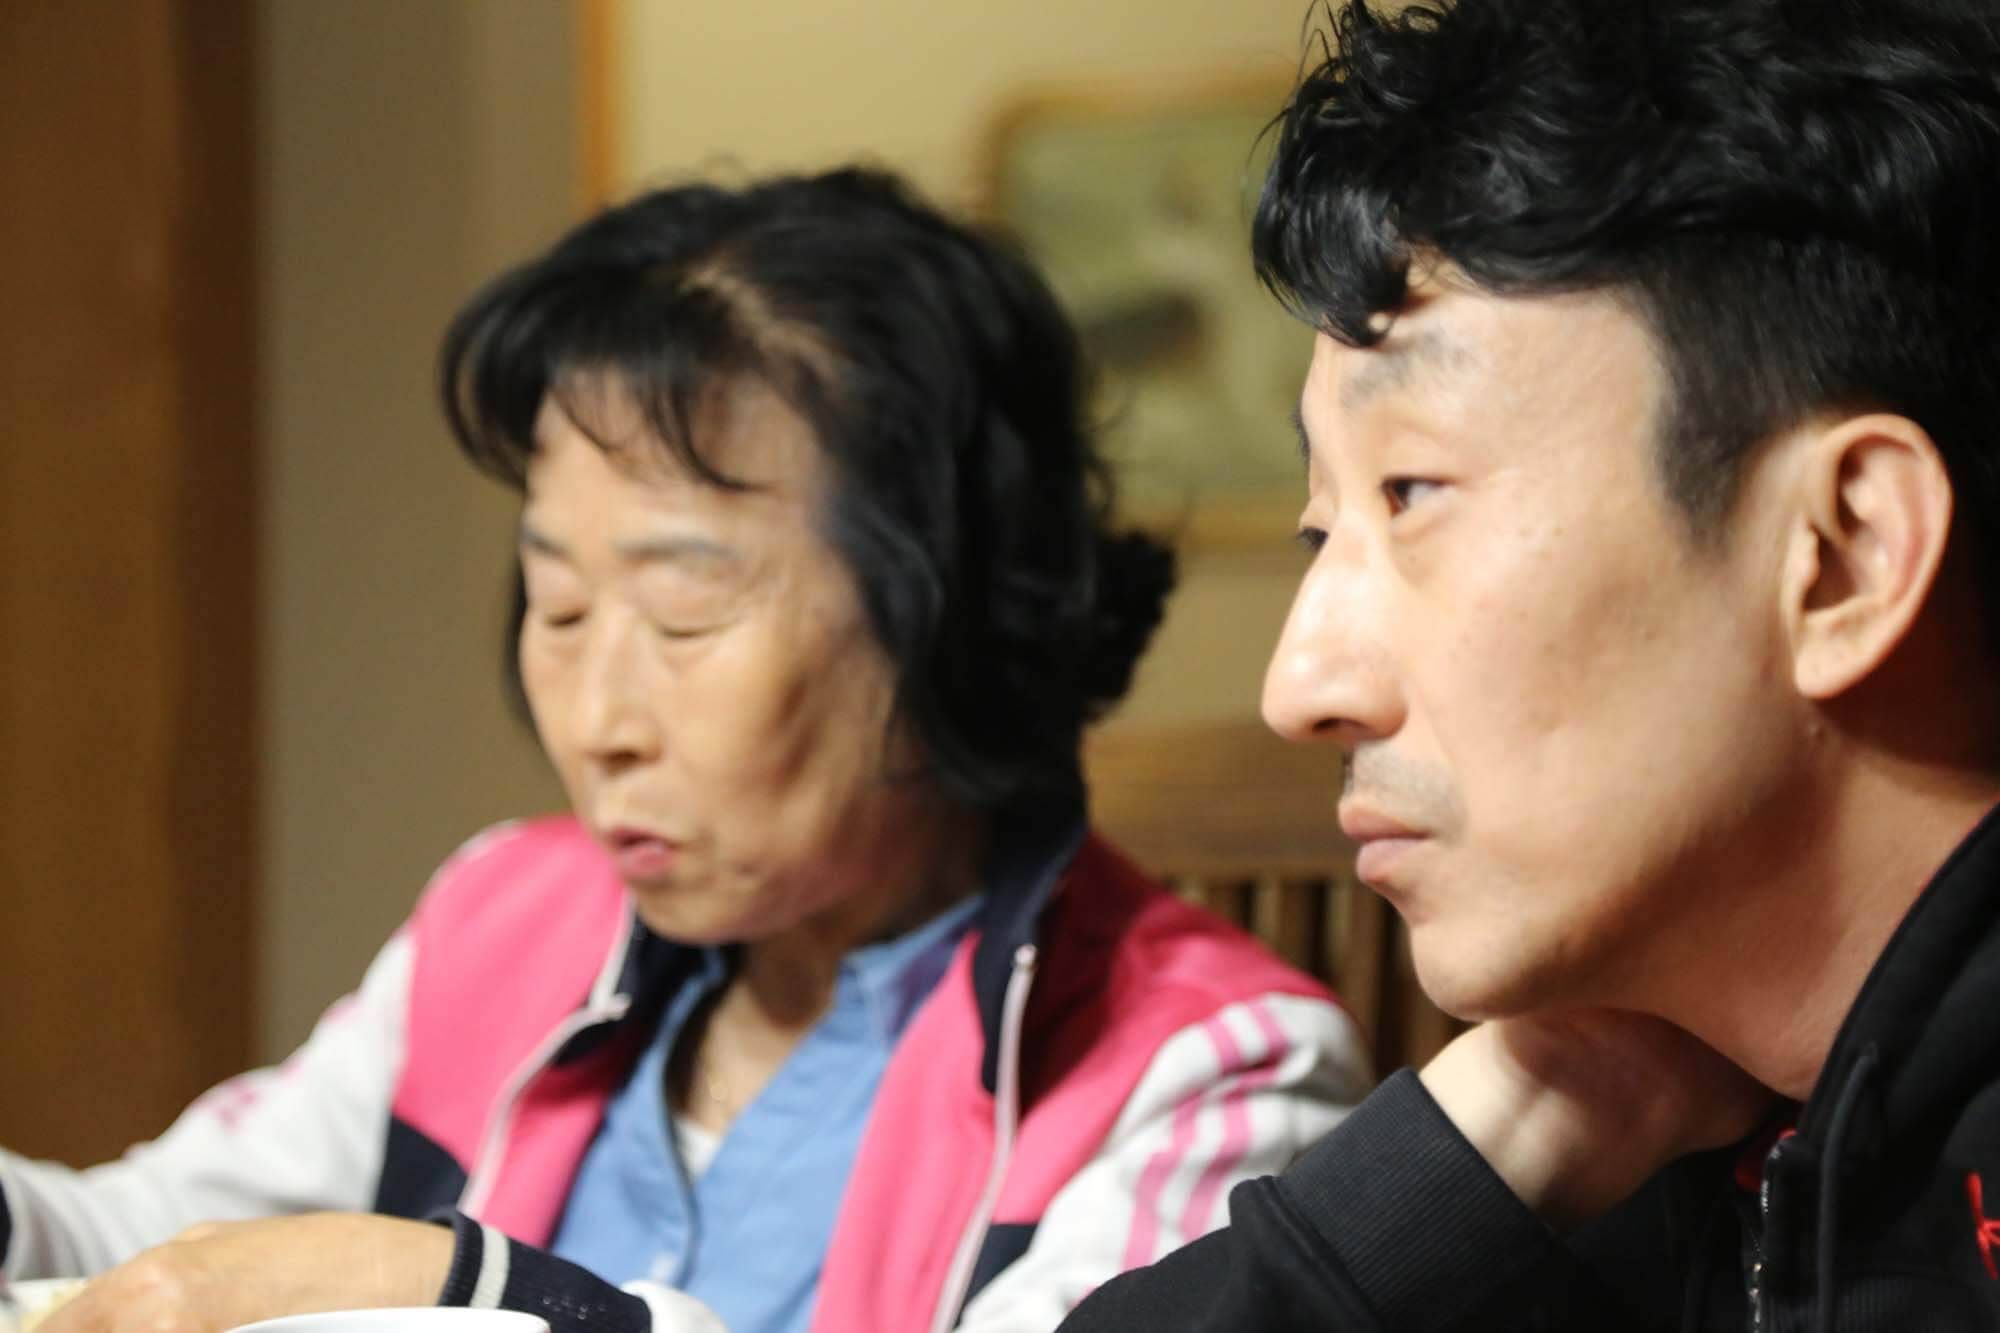 Layne Fostervold and his Korean mother in Willmar, Minnesota.